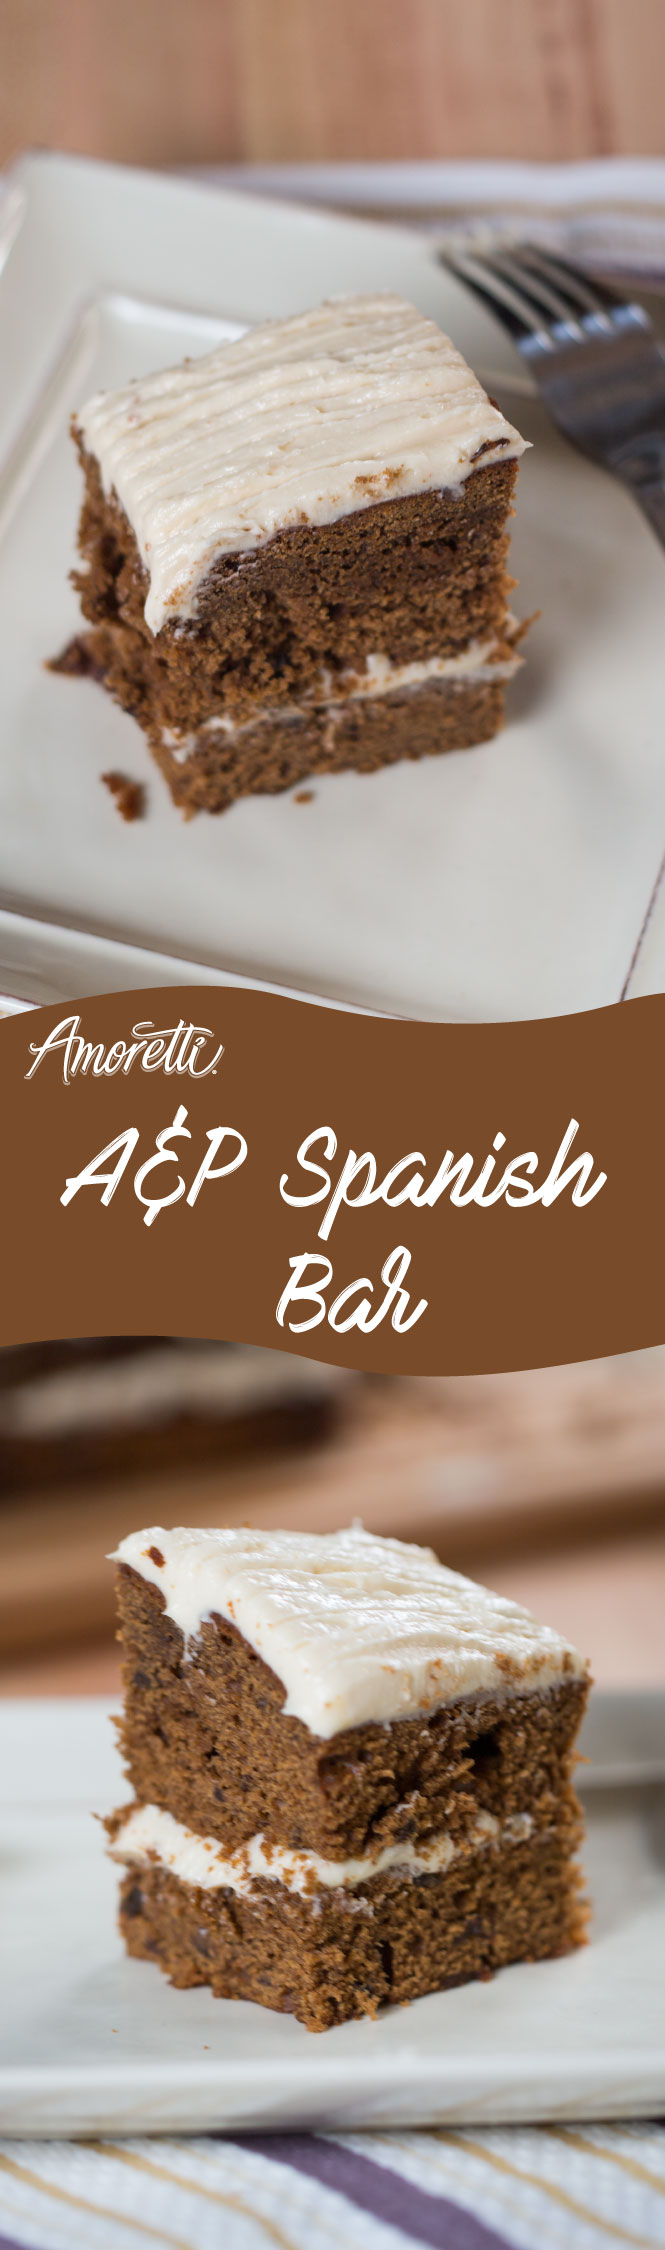 The most popular cake in the 50's and 60's, make this Spanish Bar and reminisce about those deliciously good old days!